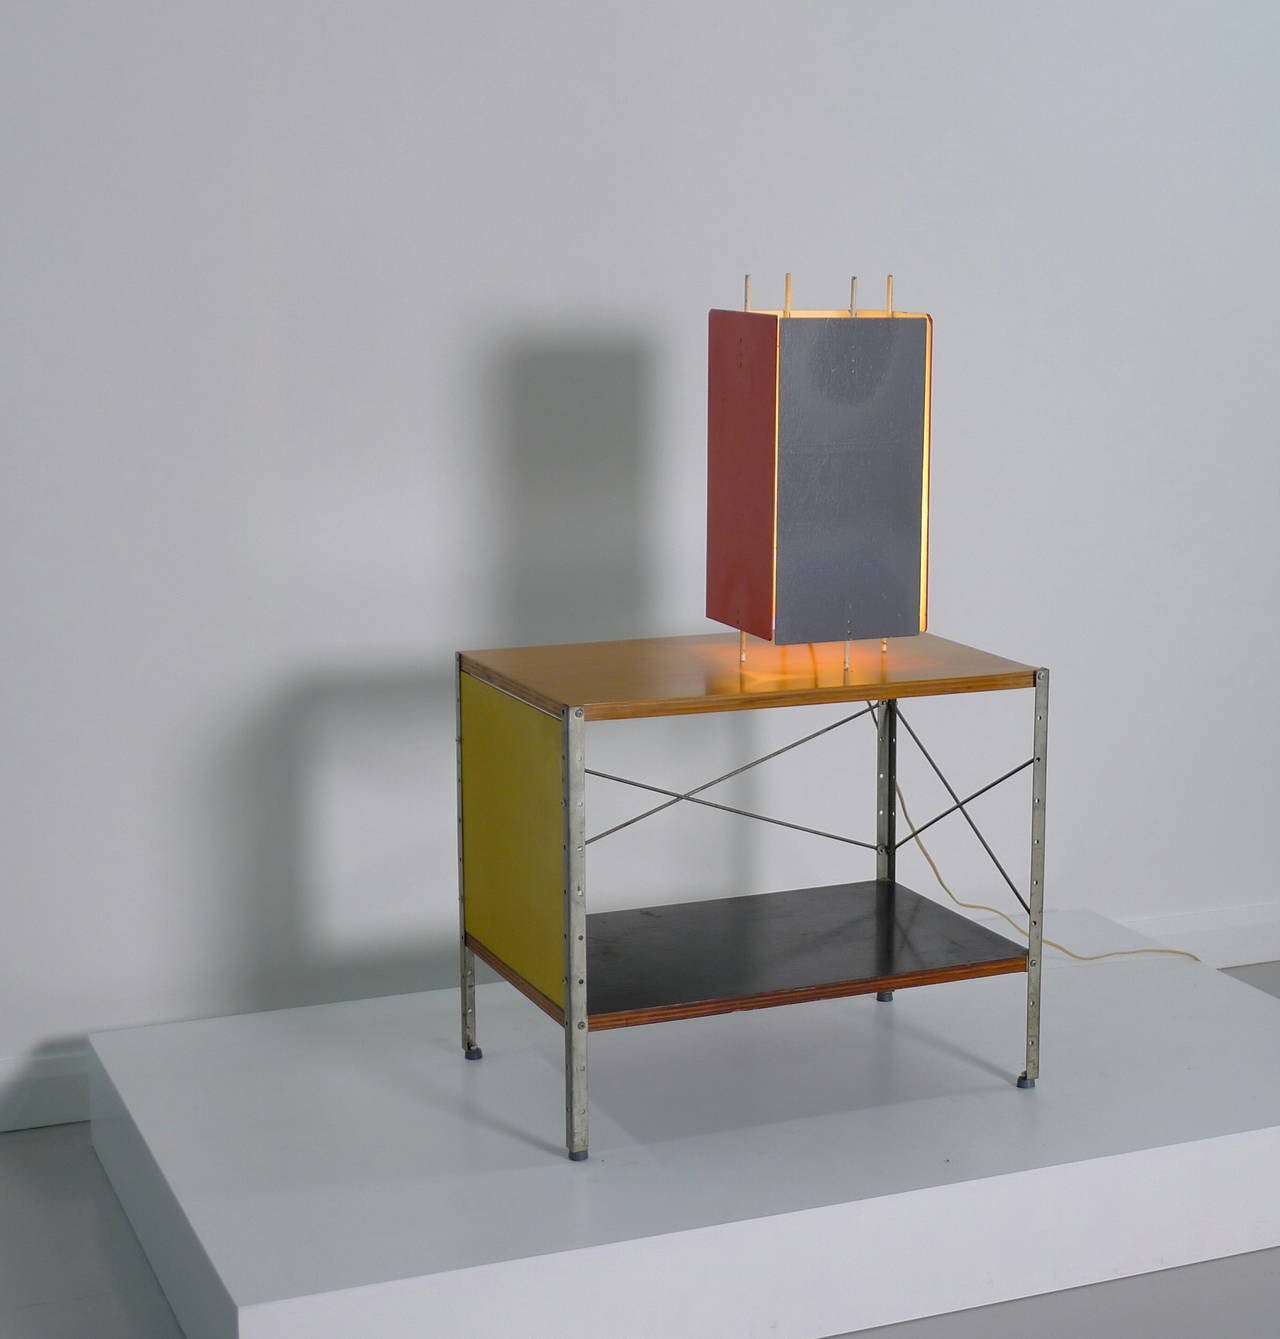 Robert Gage for the Heifetz Lighting Company, circa 1951, desk light model T-6-G. Masonite panels in unusual red and grey combination. Enamelled steel frame.